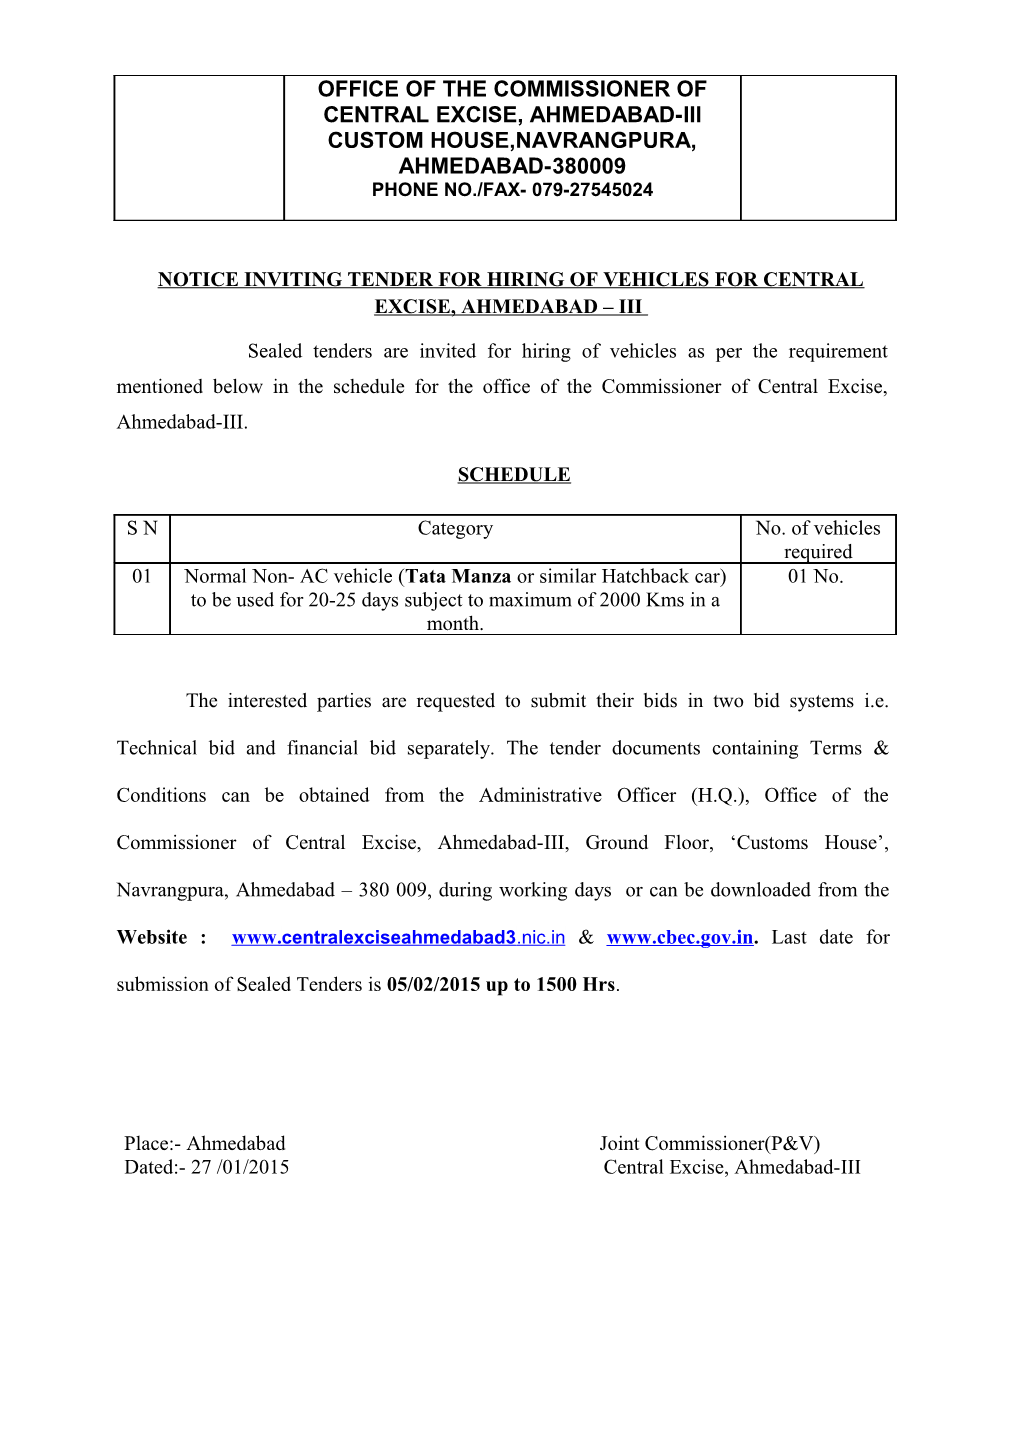 Notice Inviting Tender for Hiring of Vehicles for Central Excise, Ahmedabad Iii